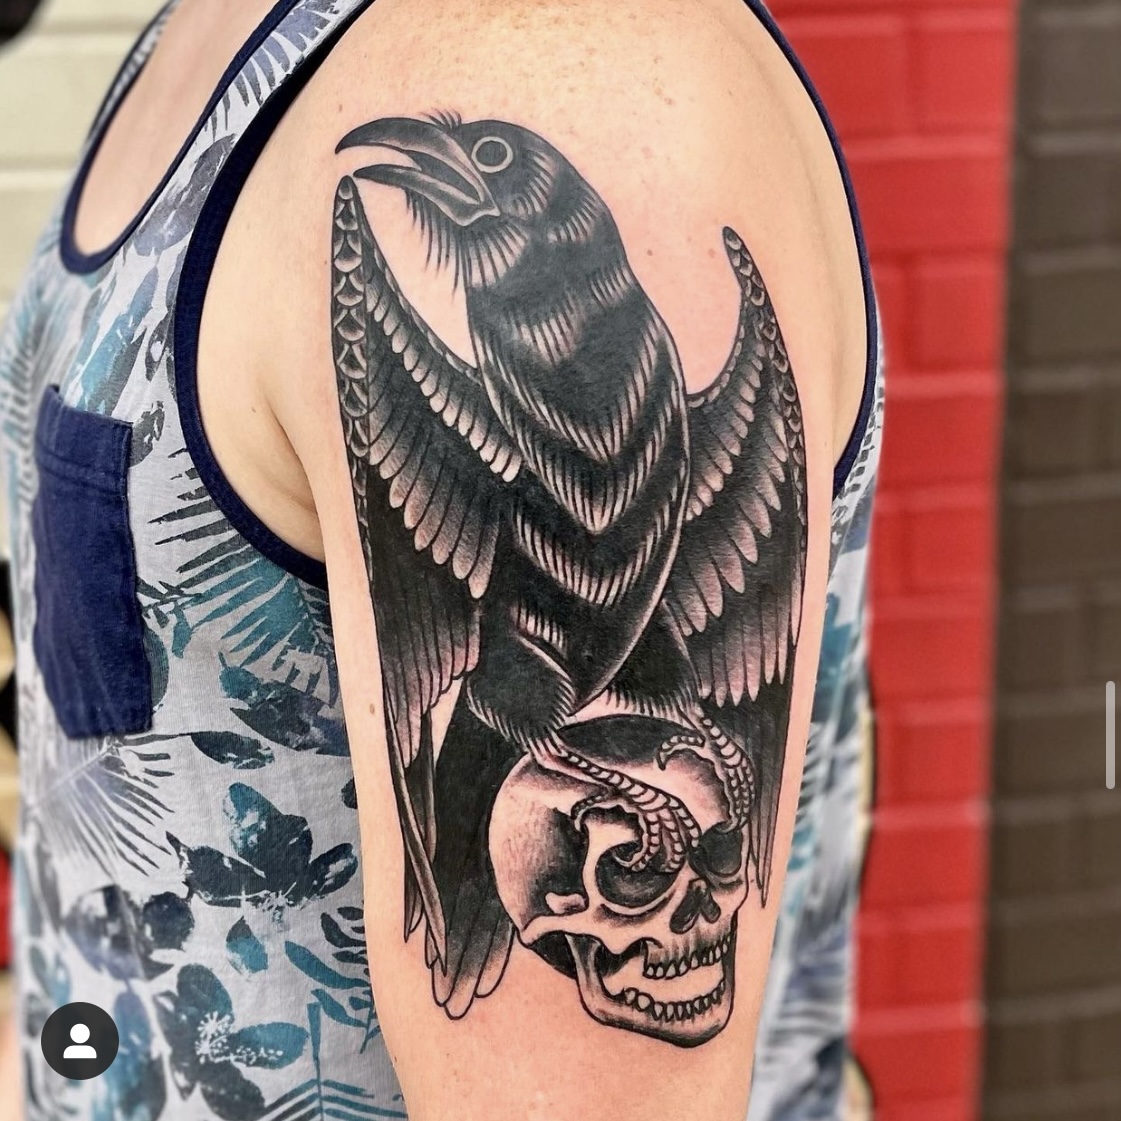 Tattoo of a skull and a raven on a man's arm